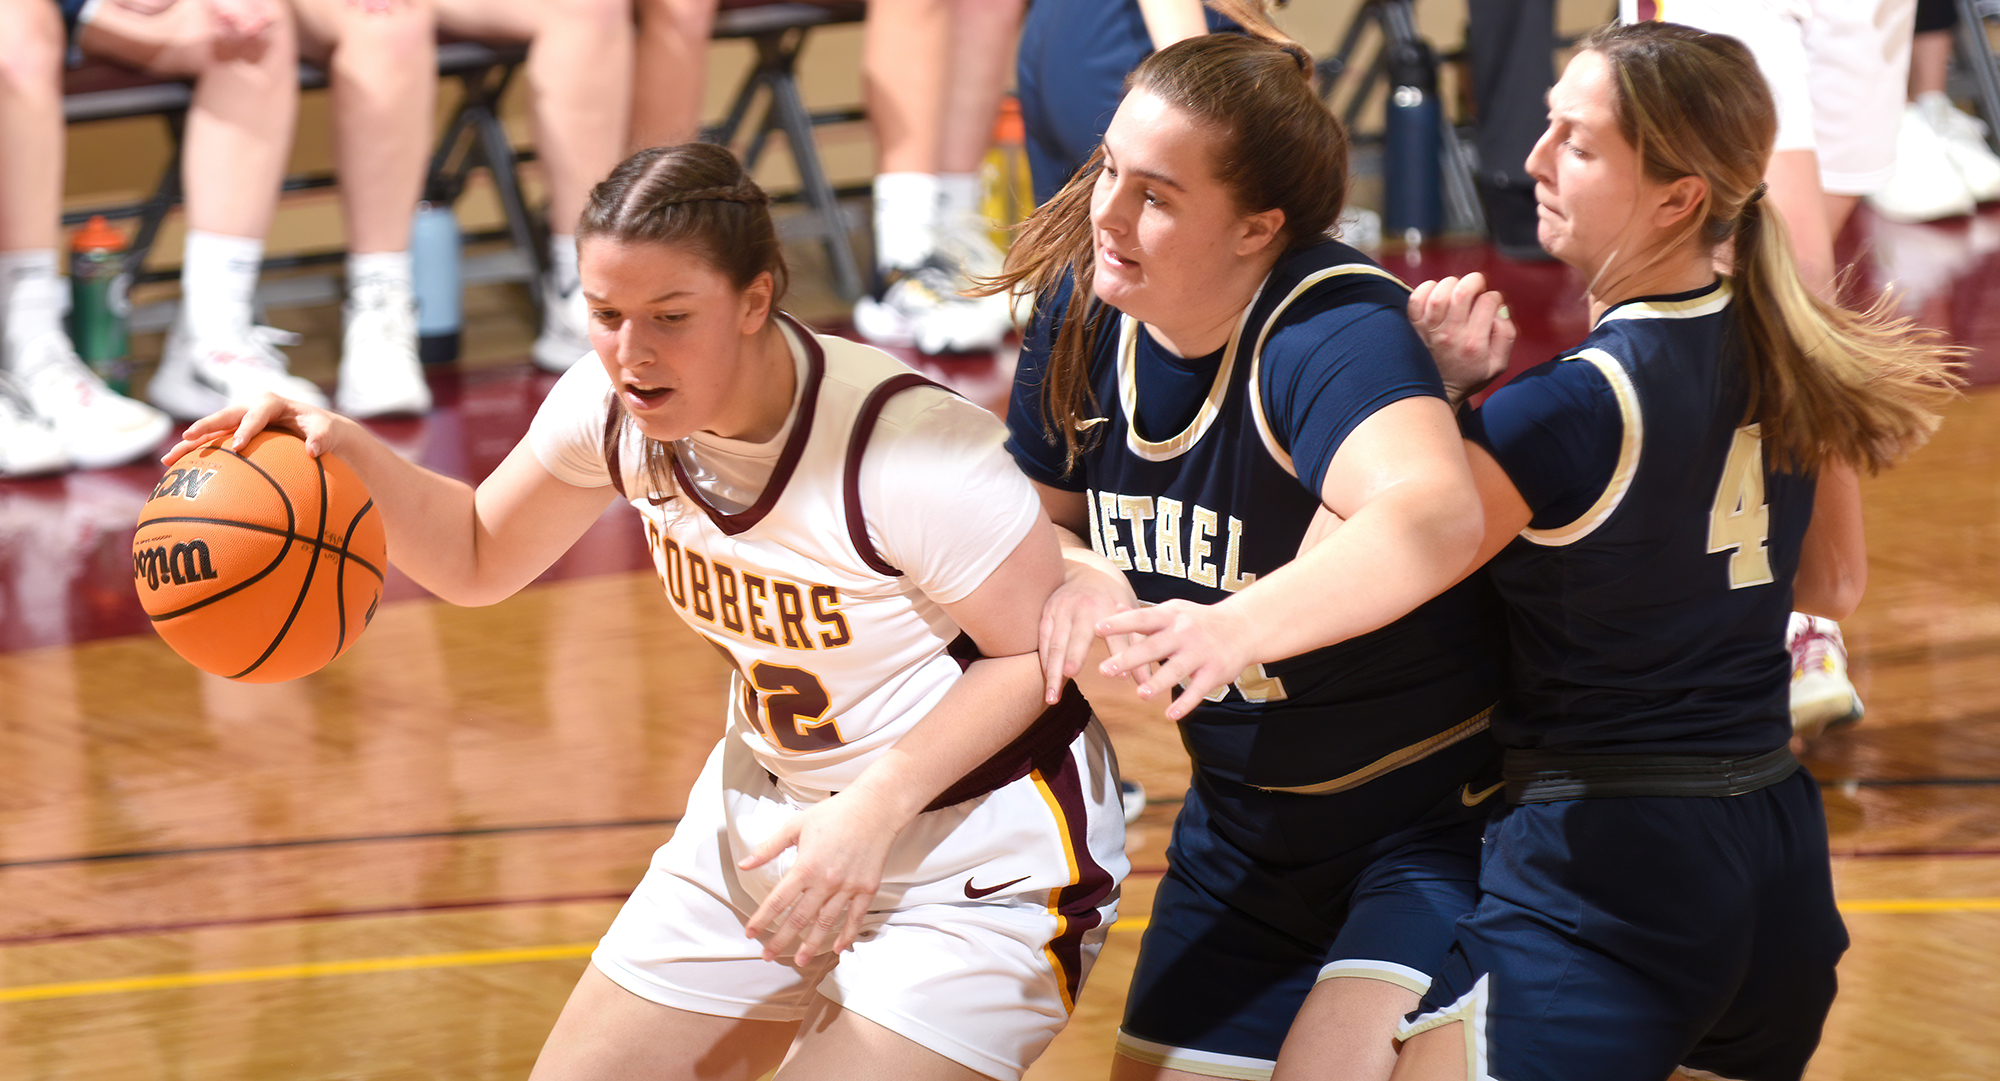 Sophomore Greta Tollefson had 15 points and a season-high eight rebounds in the Cobbers' wire-to-wire win over Bethel.